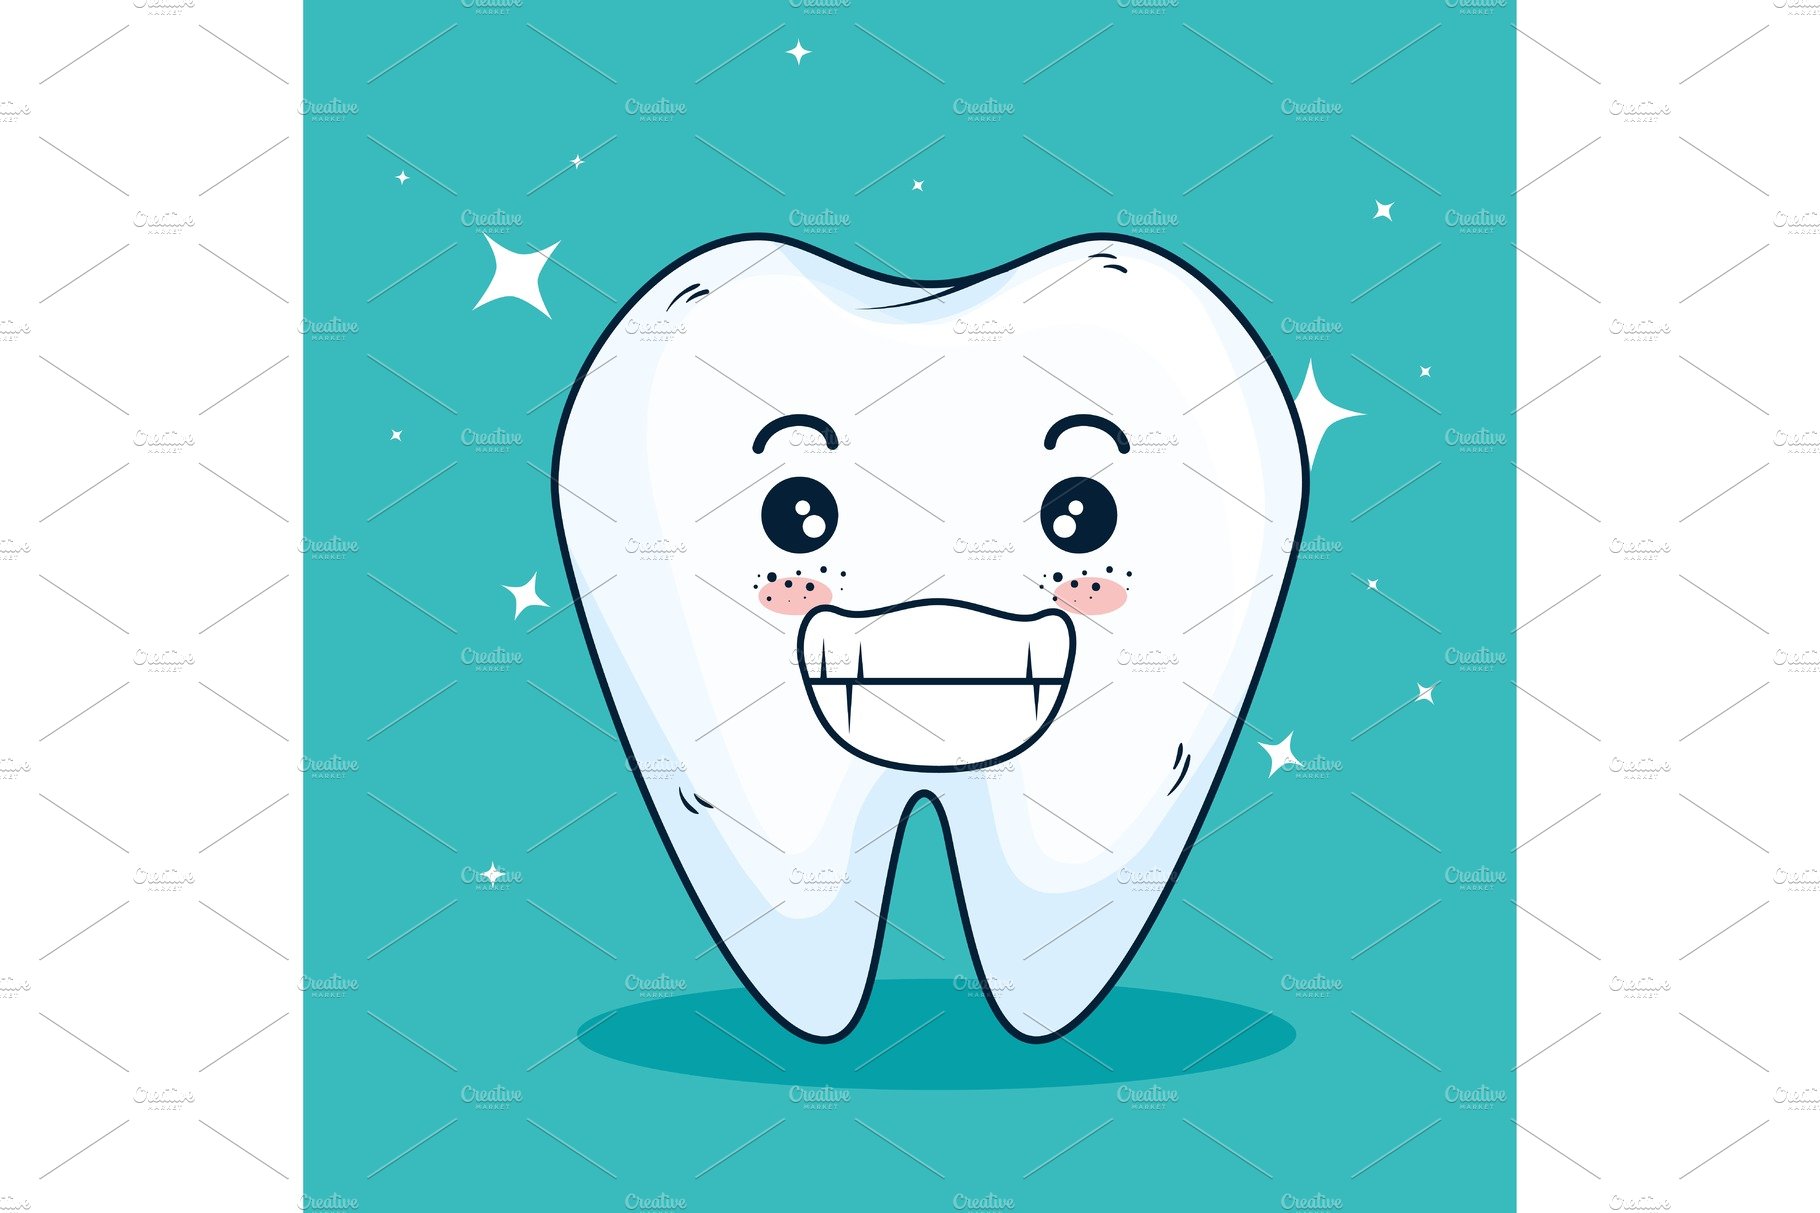 tooth clean and dentist care cover image.